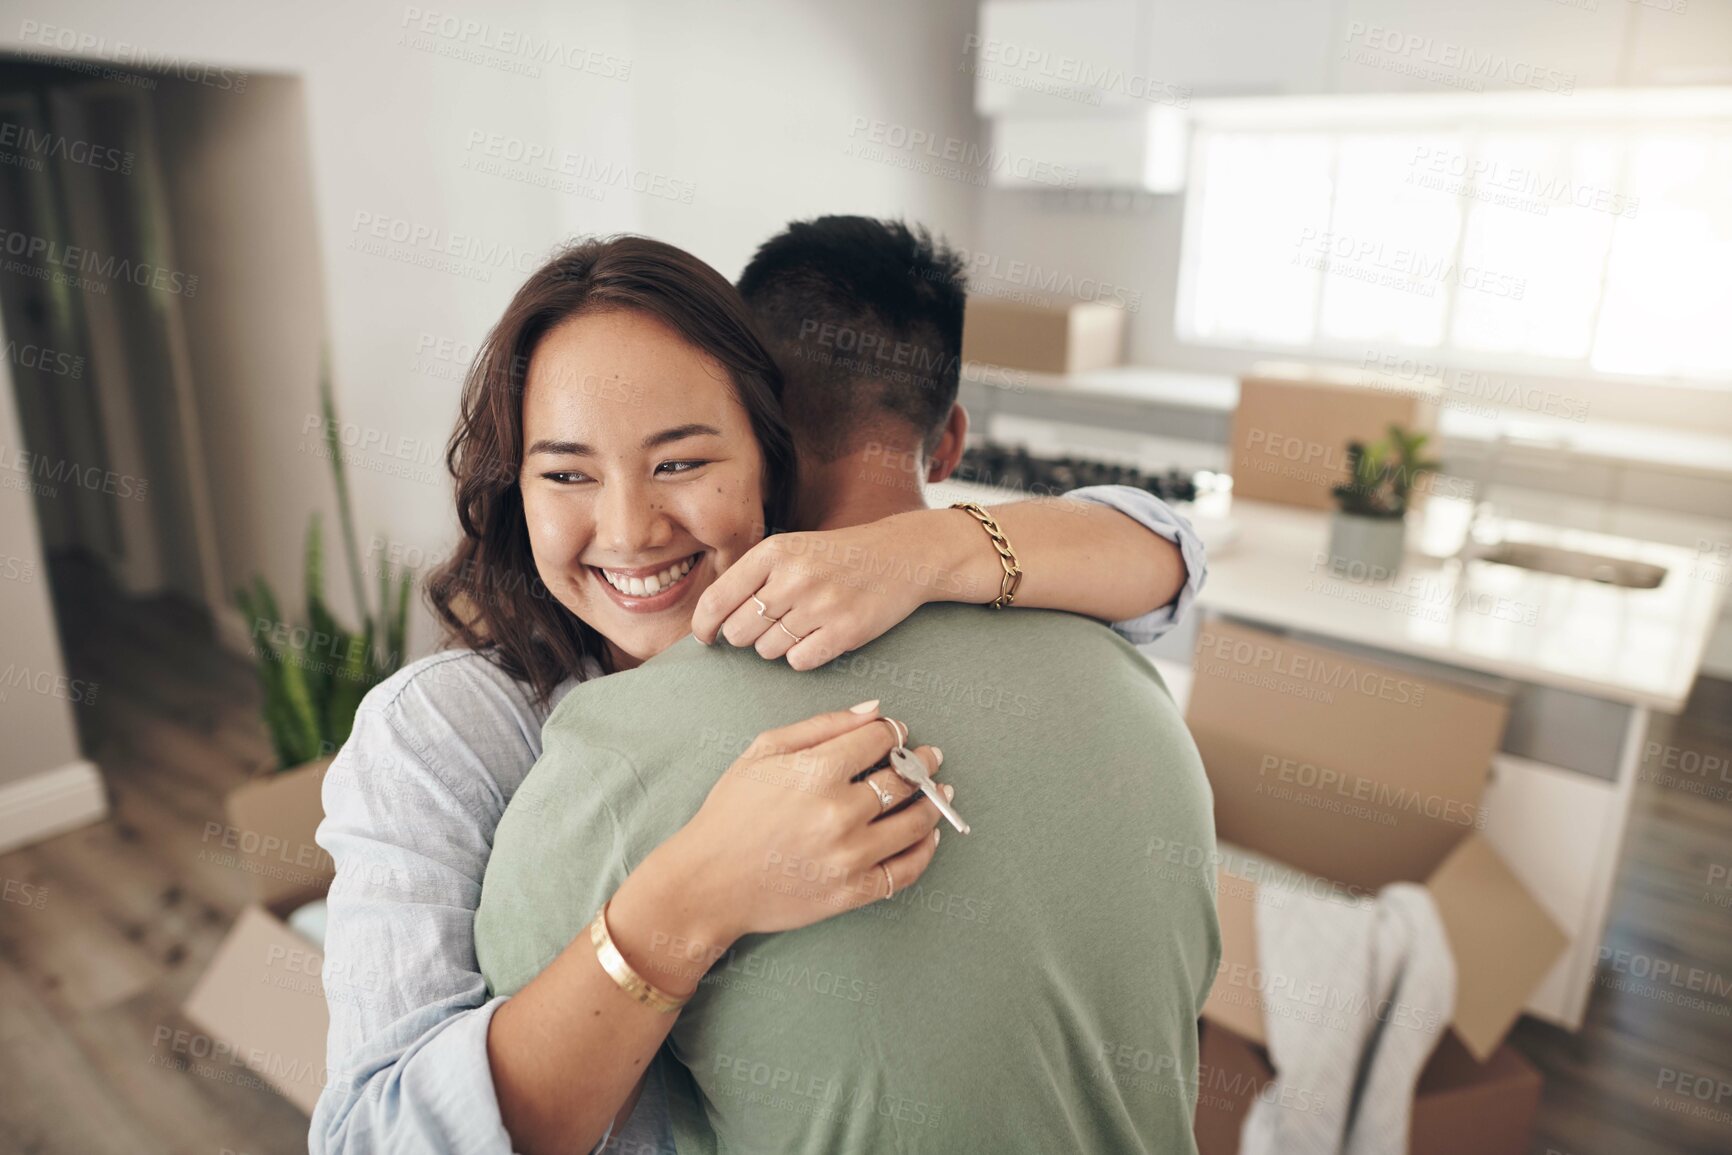 Buy stock photo Shot of a couple embracing each other while moving into their new home